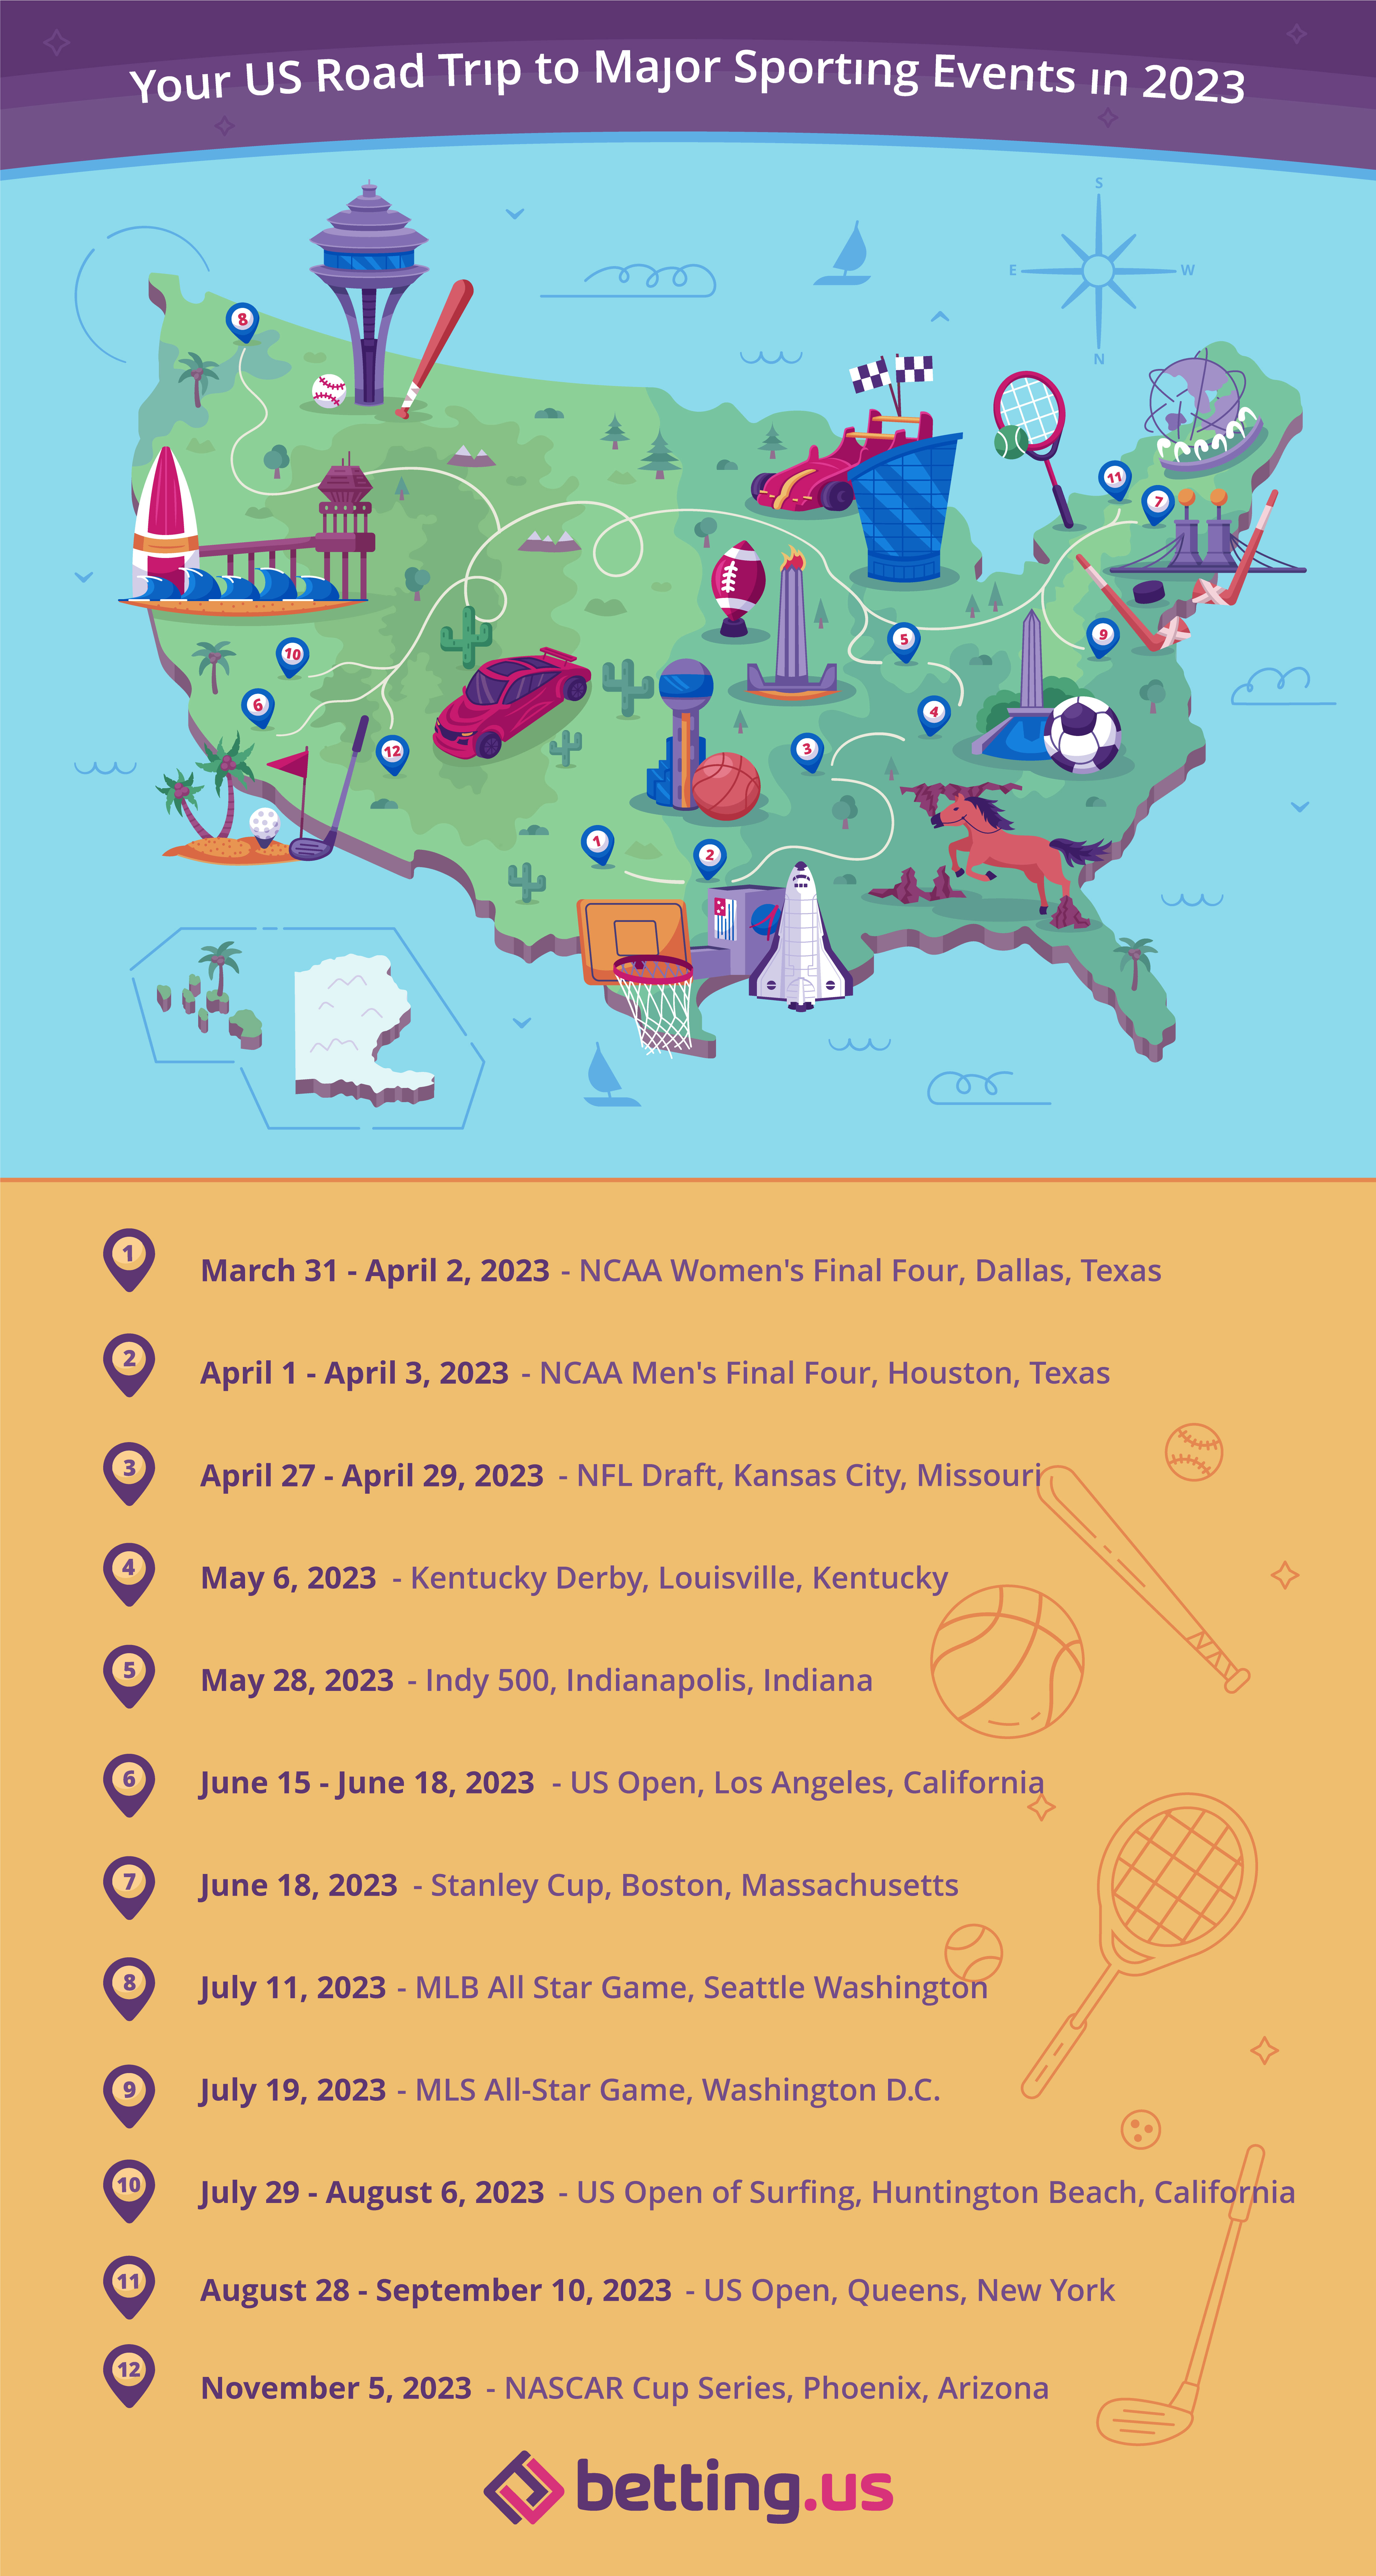 Sporting events shown on a US map alongside recognizable landmarks where the events are taking place.